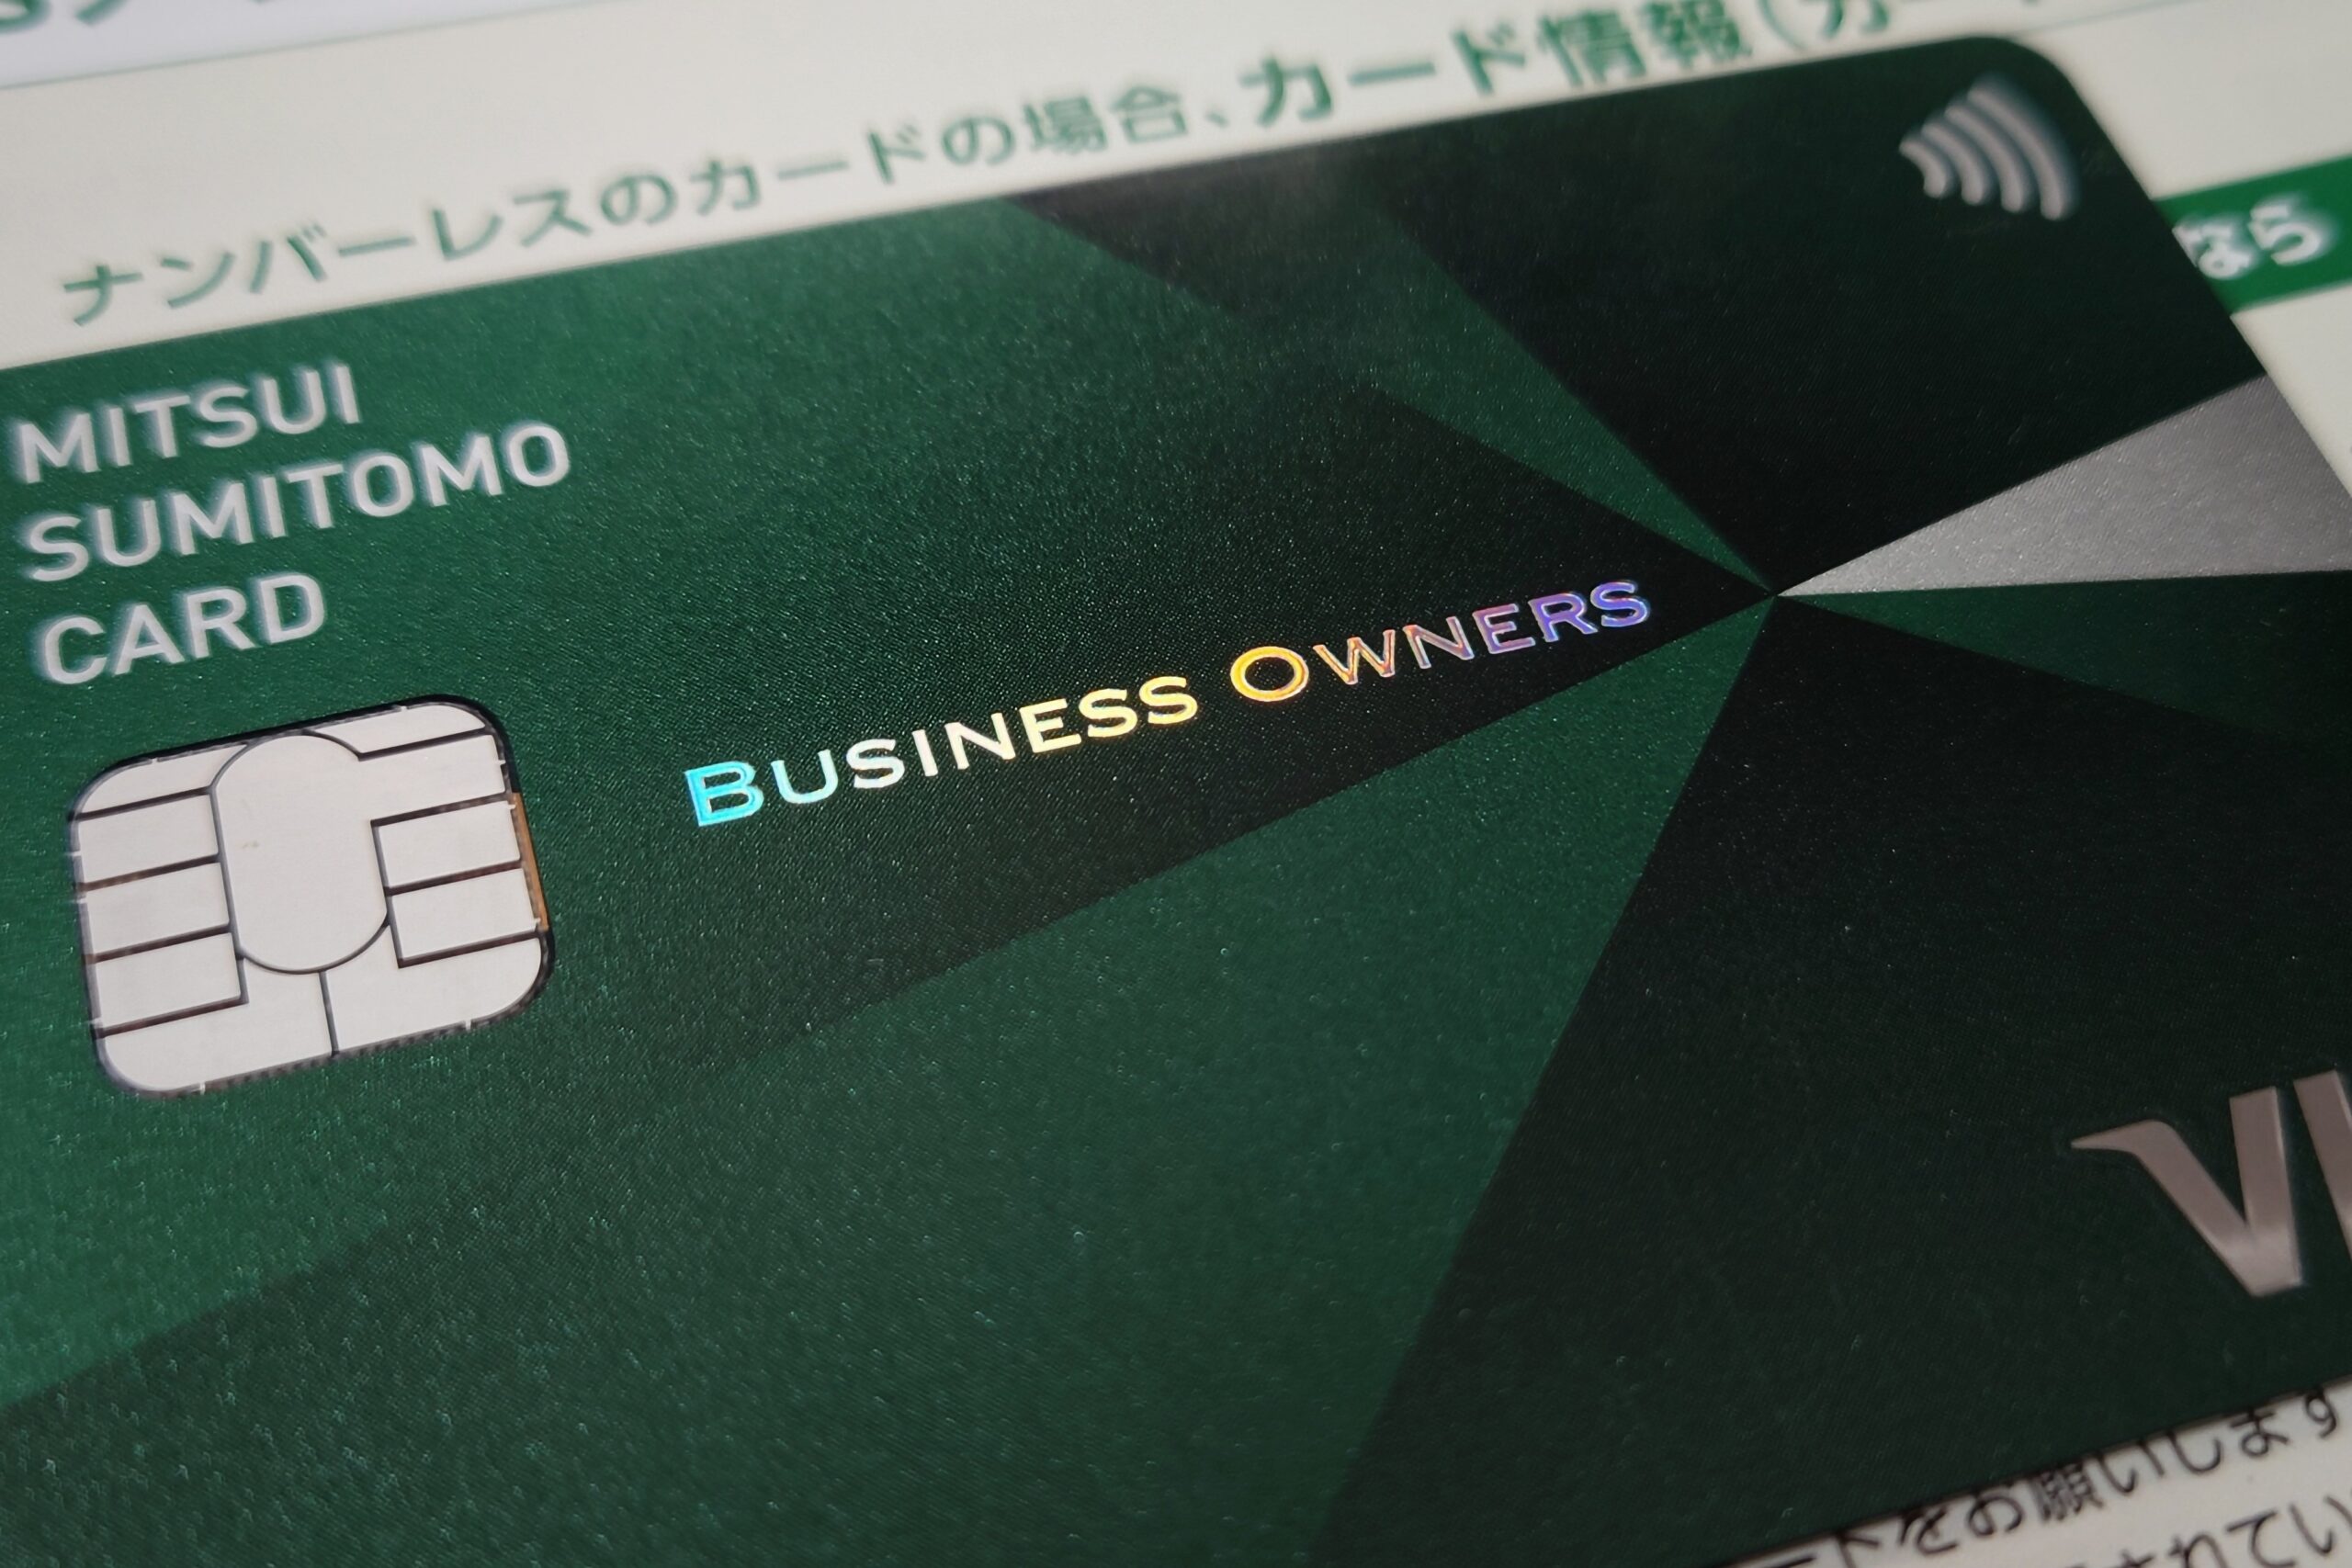 BUSINESS OWNERSの刻印